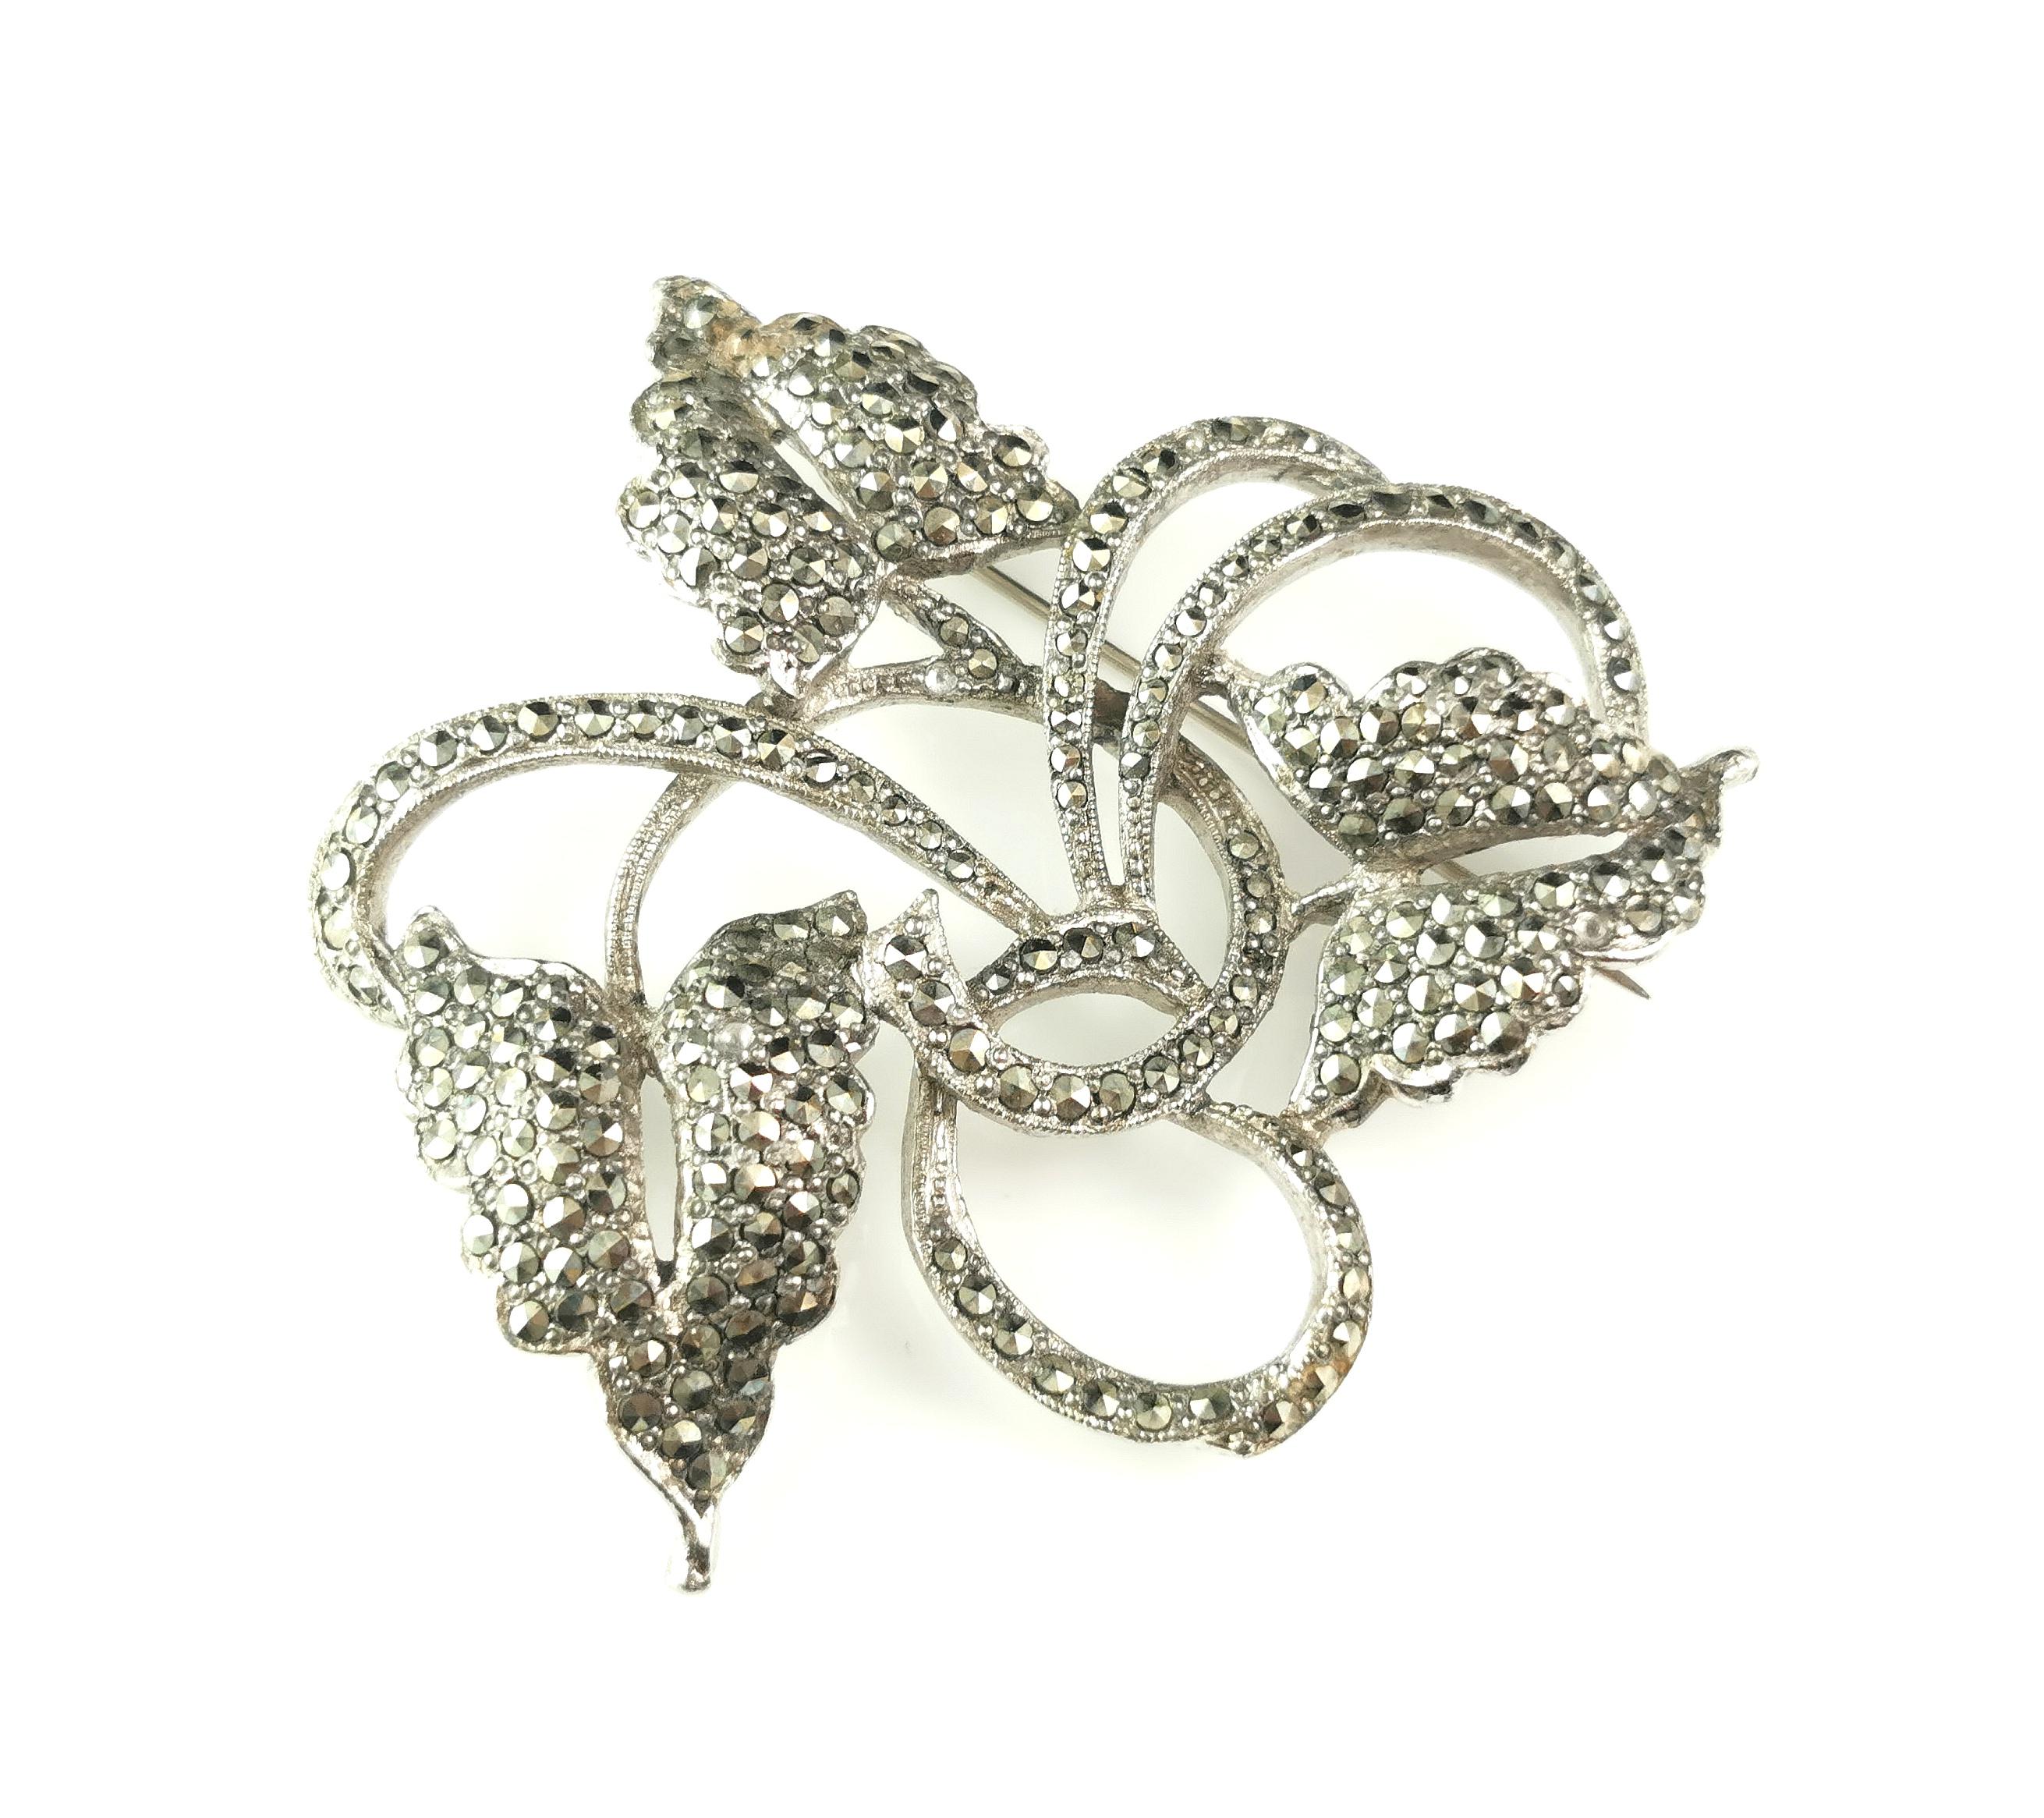 A beautiful vintage marcasite leaf and vine brooch.

This is a larger sized brooch in a leaf and vine design, crafted in silver plated steel and adorned with marcasite stones.

It has a safety style catch and pin fastener.

Unmarked